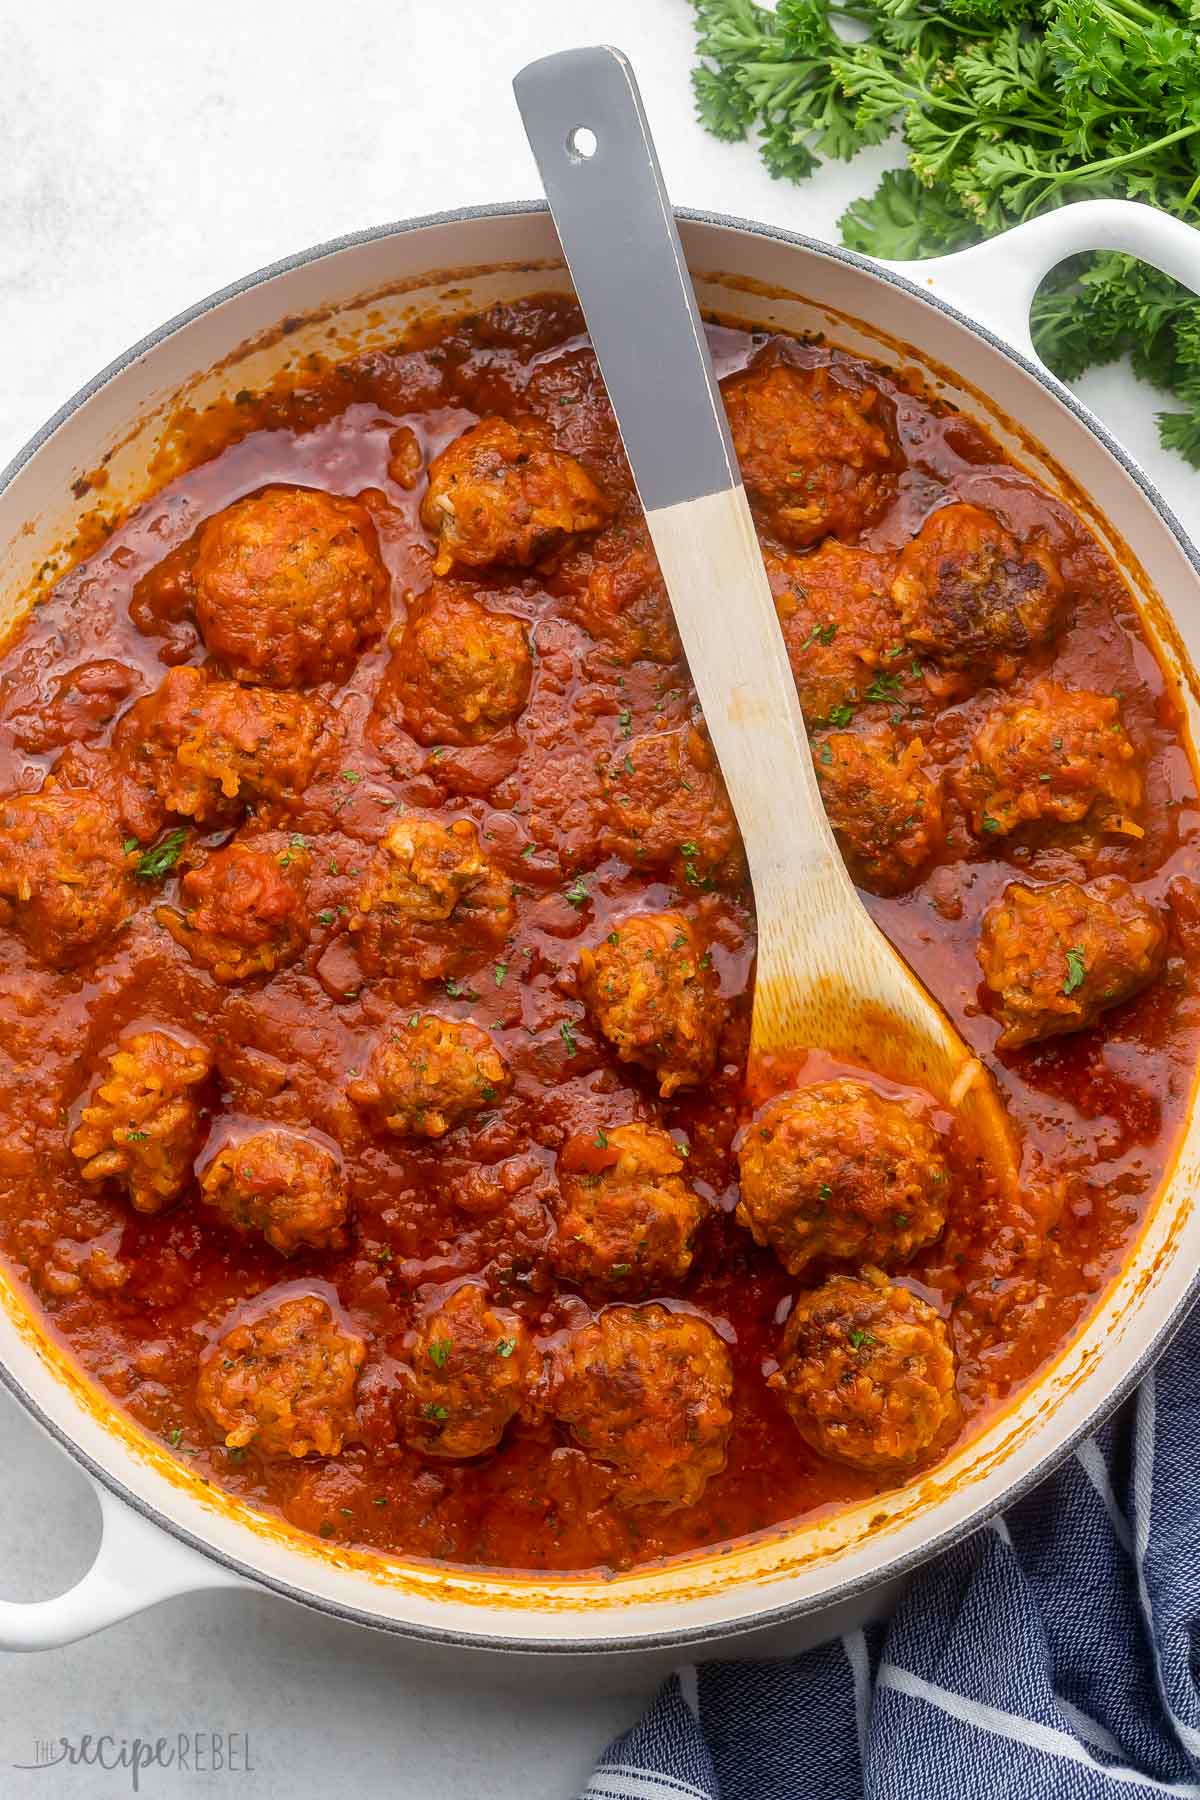 wooden spoon in pan of porcupine meatballs with parsley beside.